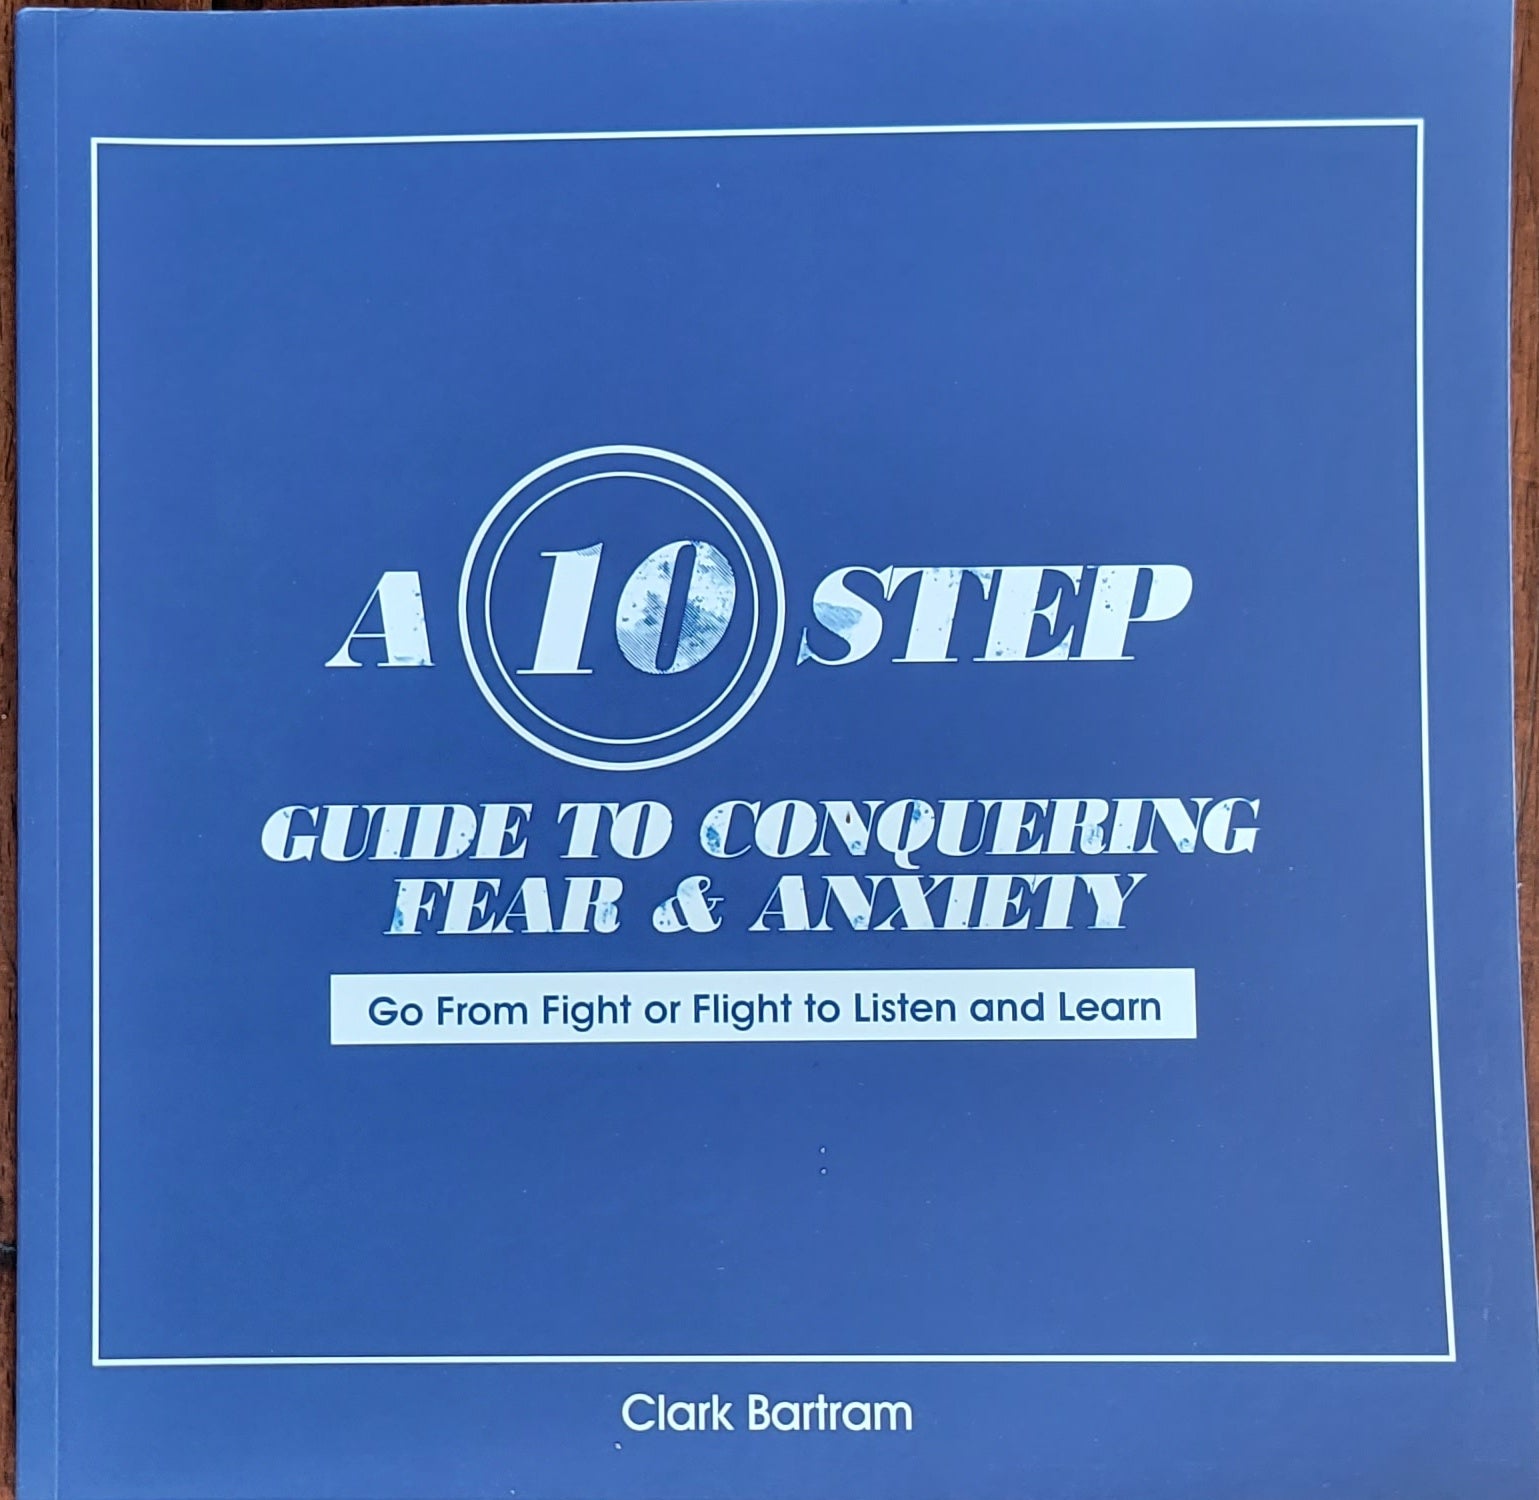 SIGNED-A 10 Step Guide To Conquering Fear & Anxiety: Go From Fight to Flight To Listen and Learn By Clark Bartram